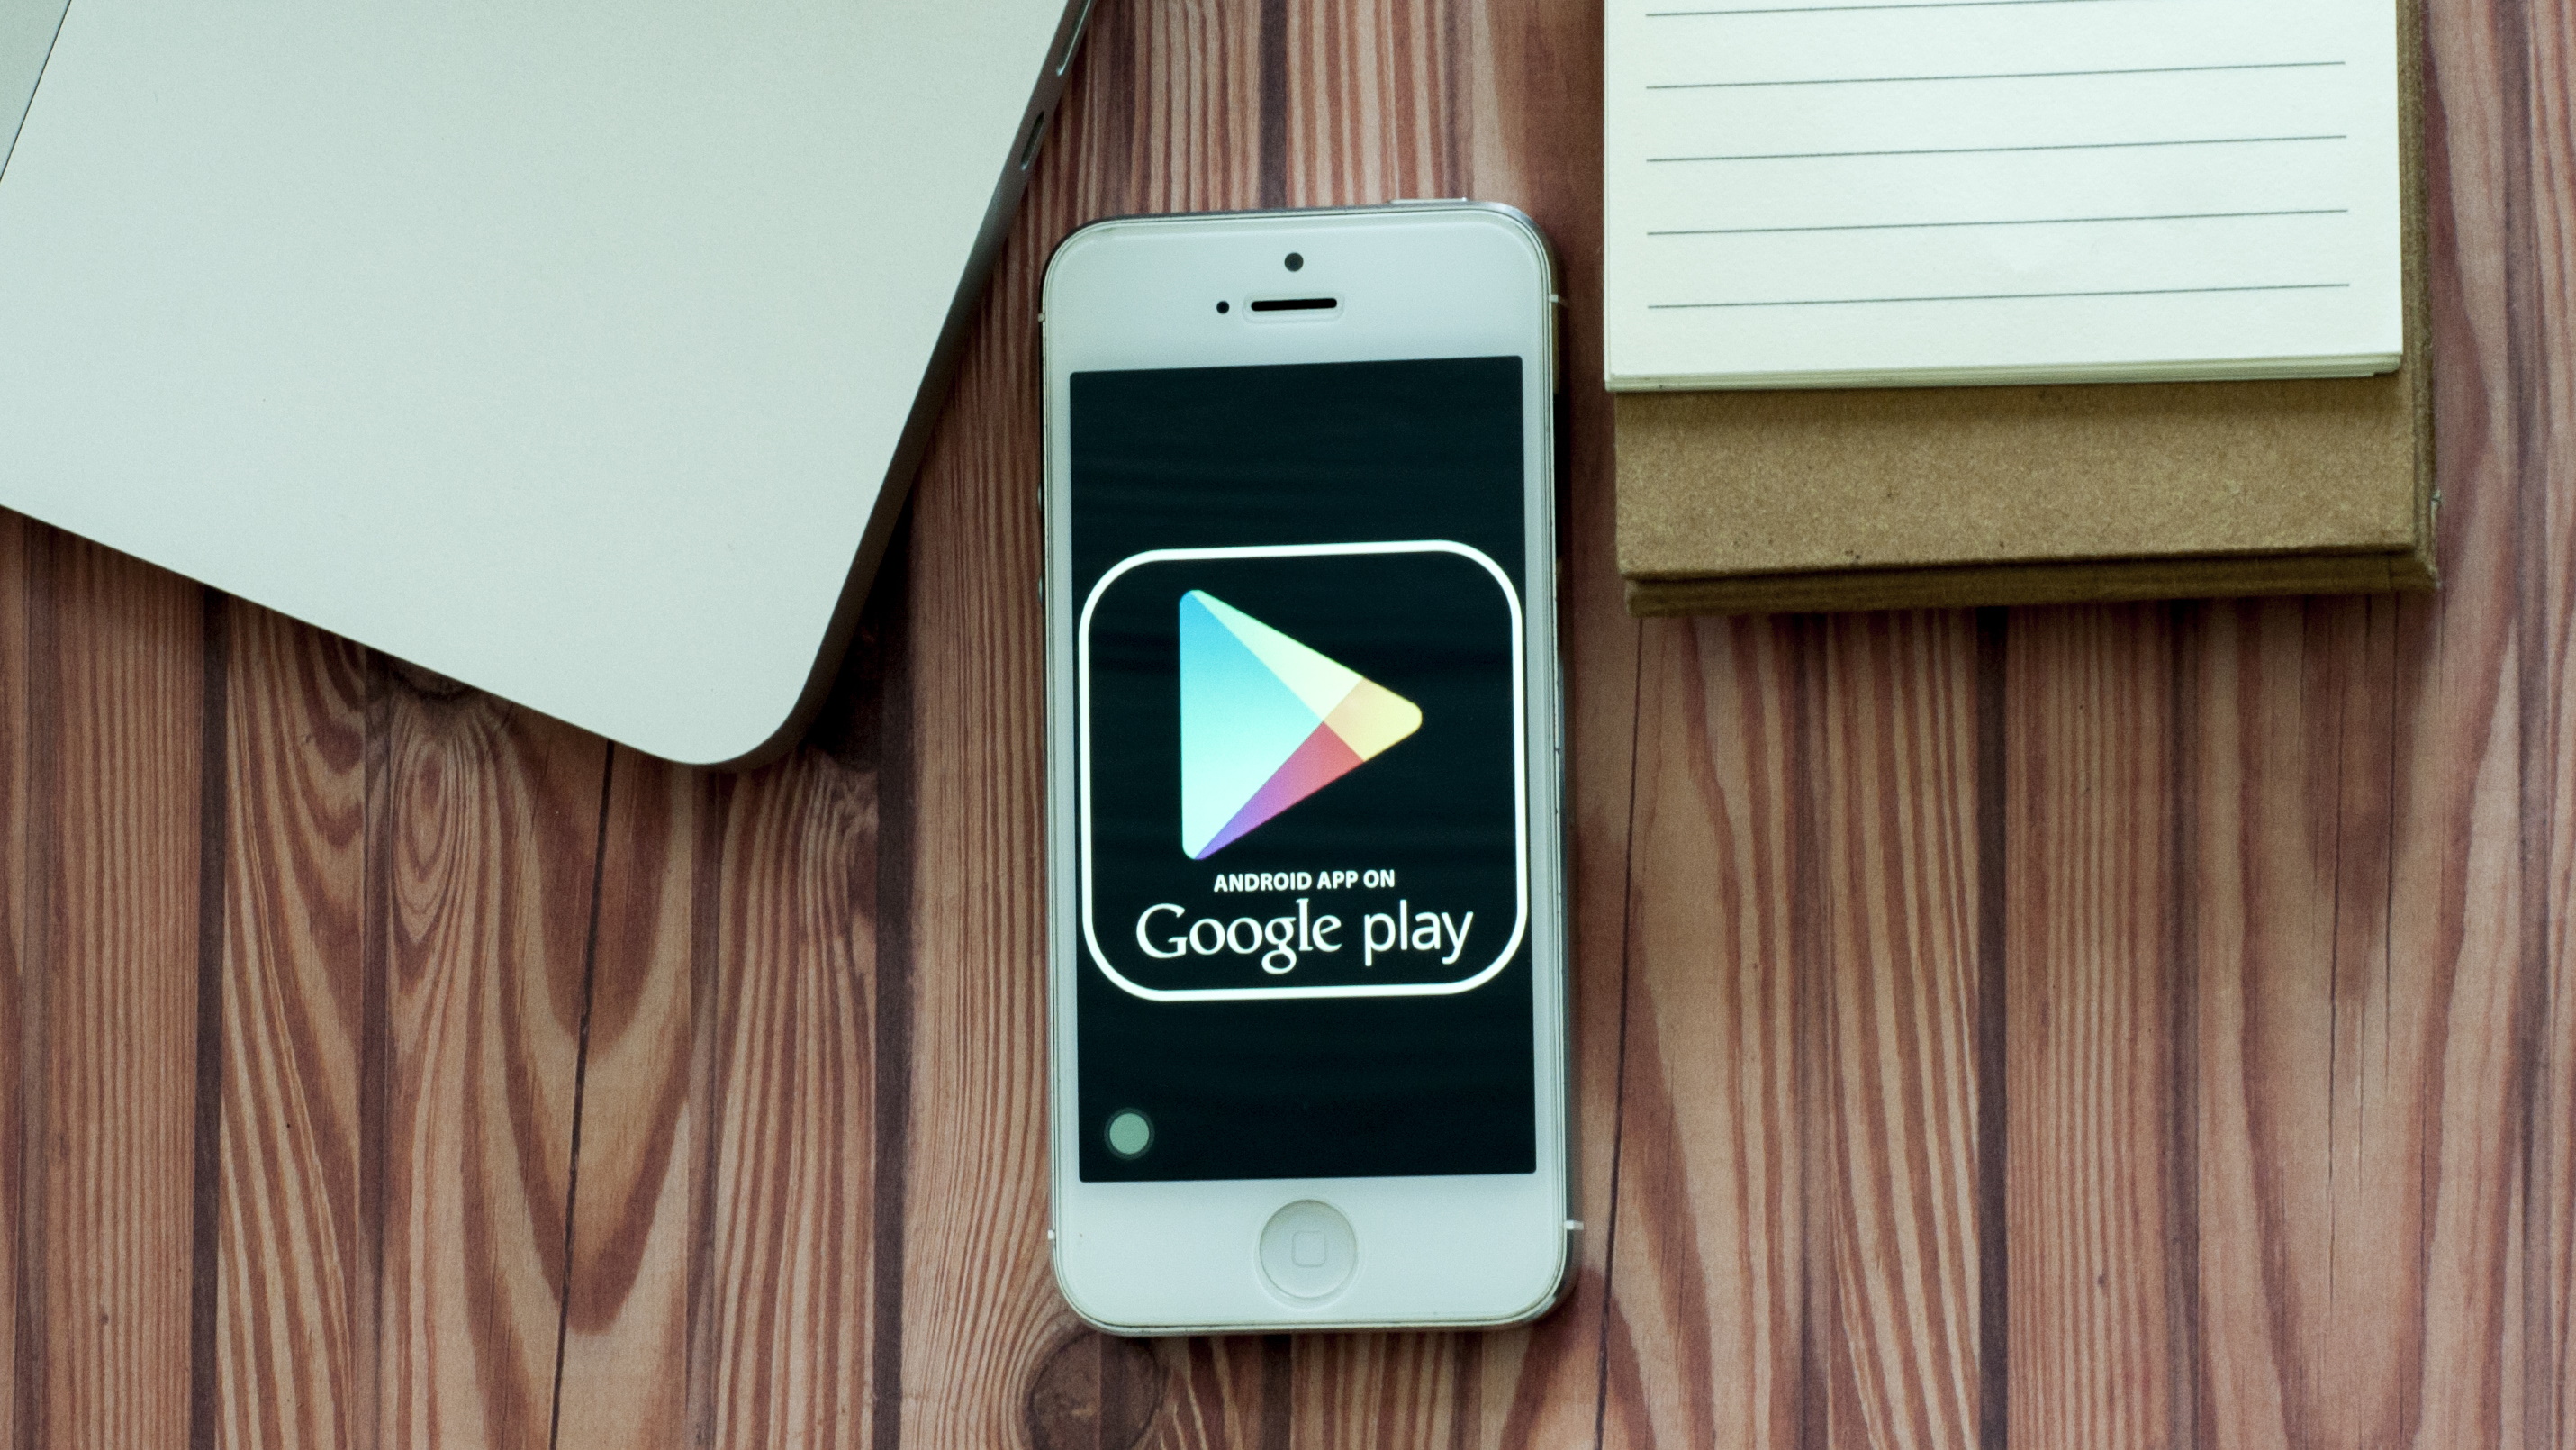 11 Google Play Apps Infected With Nasty Android Malware What To